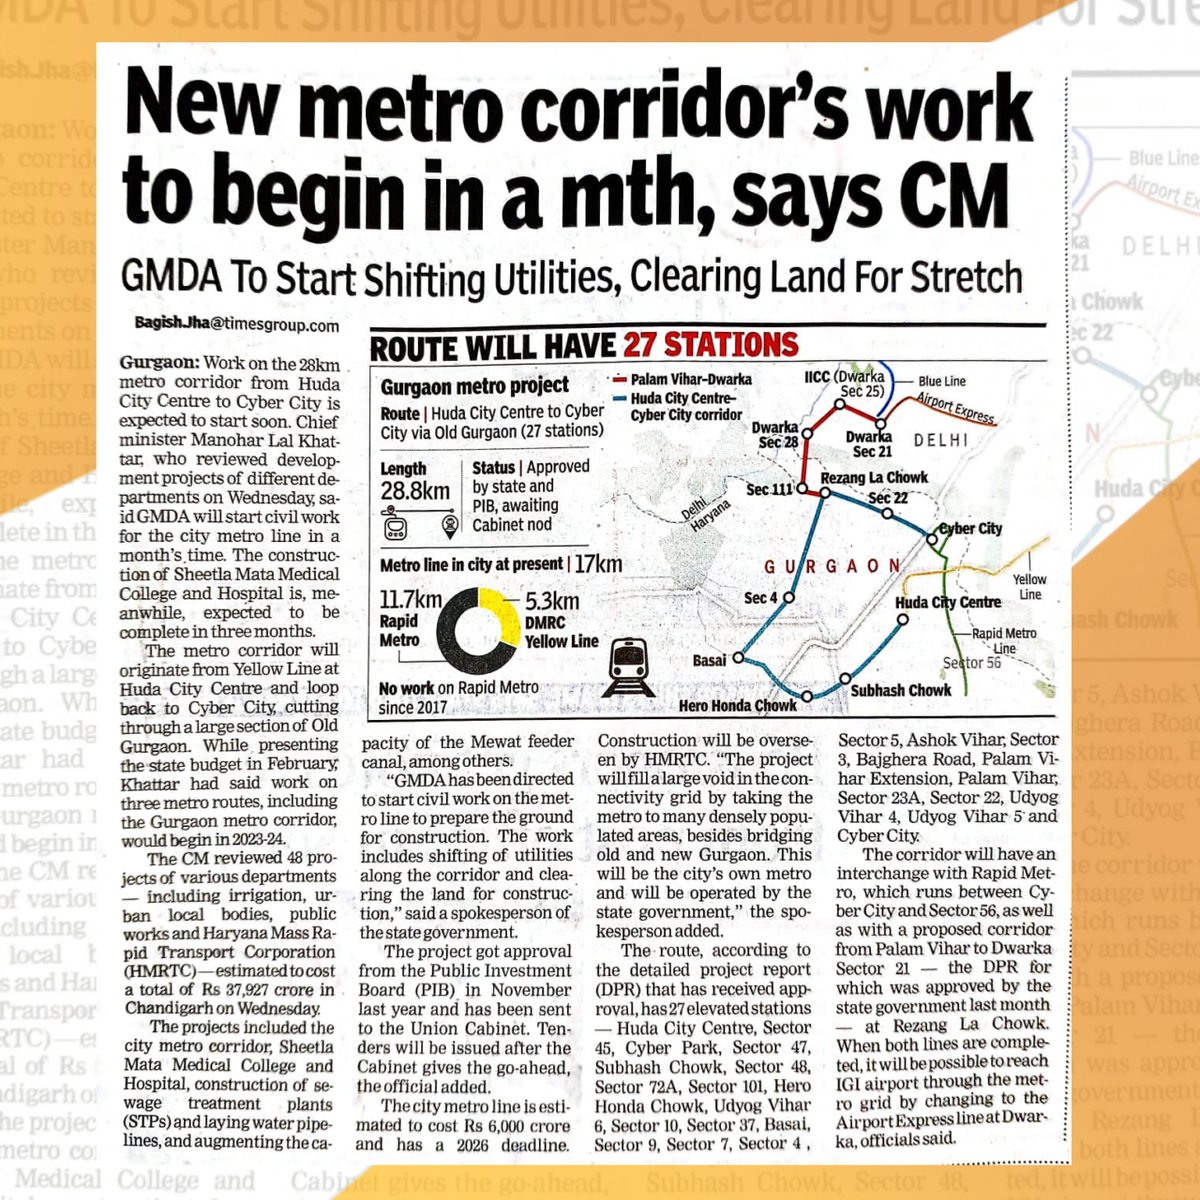 Great news for Gurugram! The construction work of the Gurugram Metro project is set to begin in a month.
The proposed 28.5-km-long corridor, from Huda City Centre to Cyber City via Old Gurgaon is expected to have 27 stations.

#NewsUpdates #GurugramMetro #ConnectingCommunities